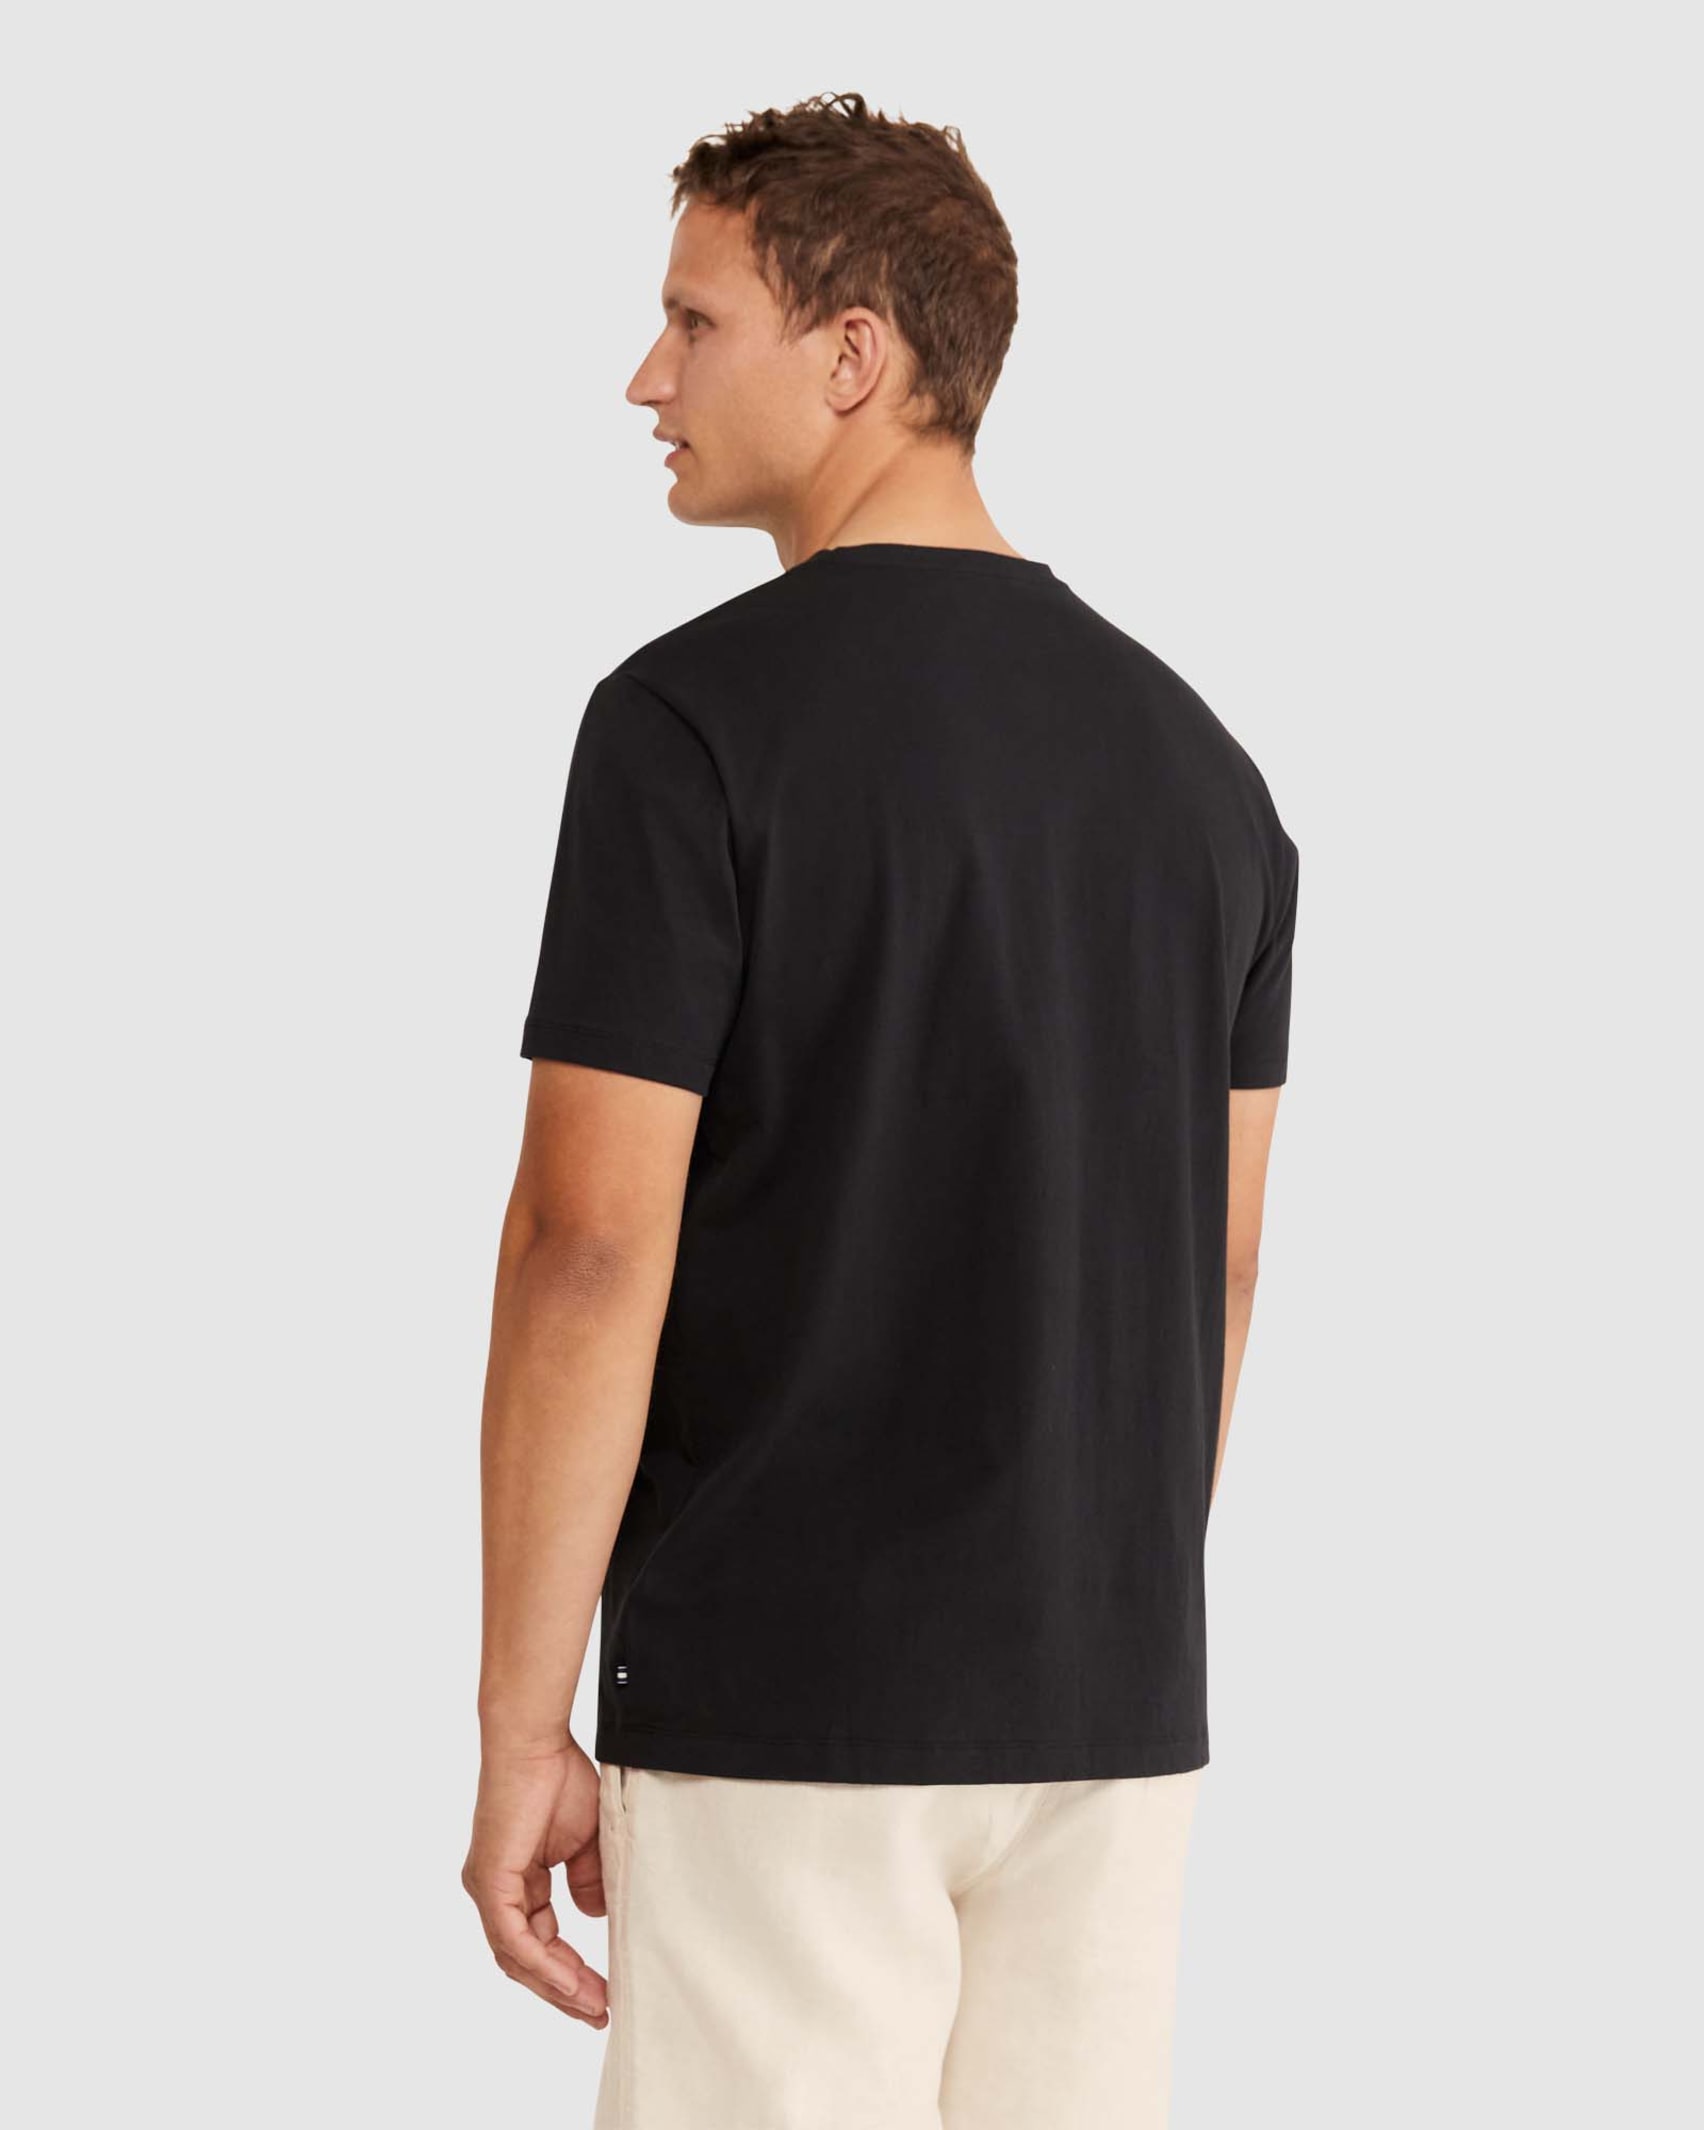 Supersoft Tee in BLACK